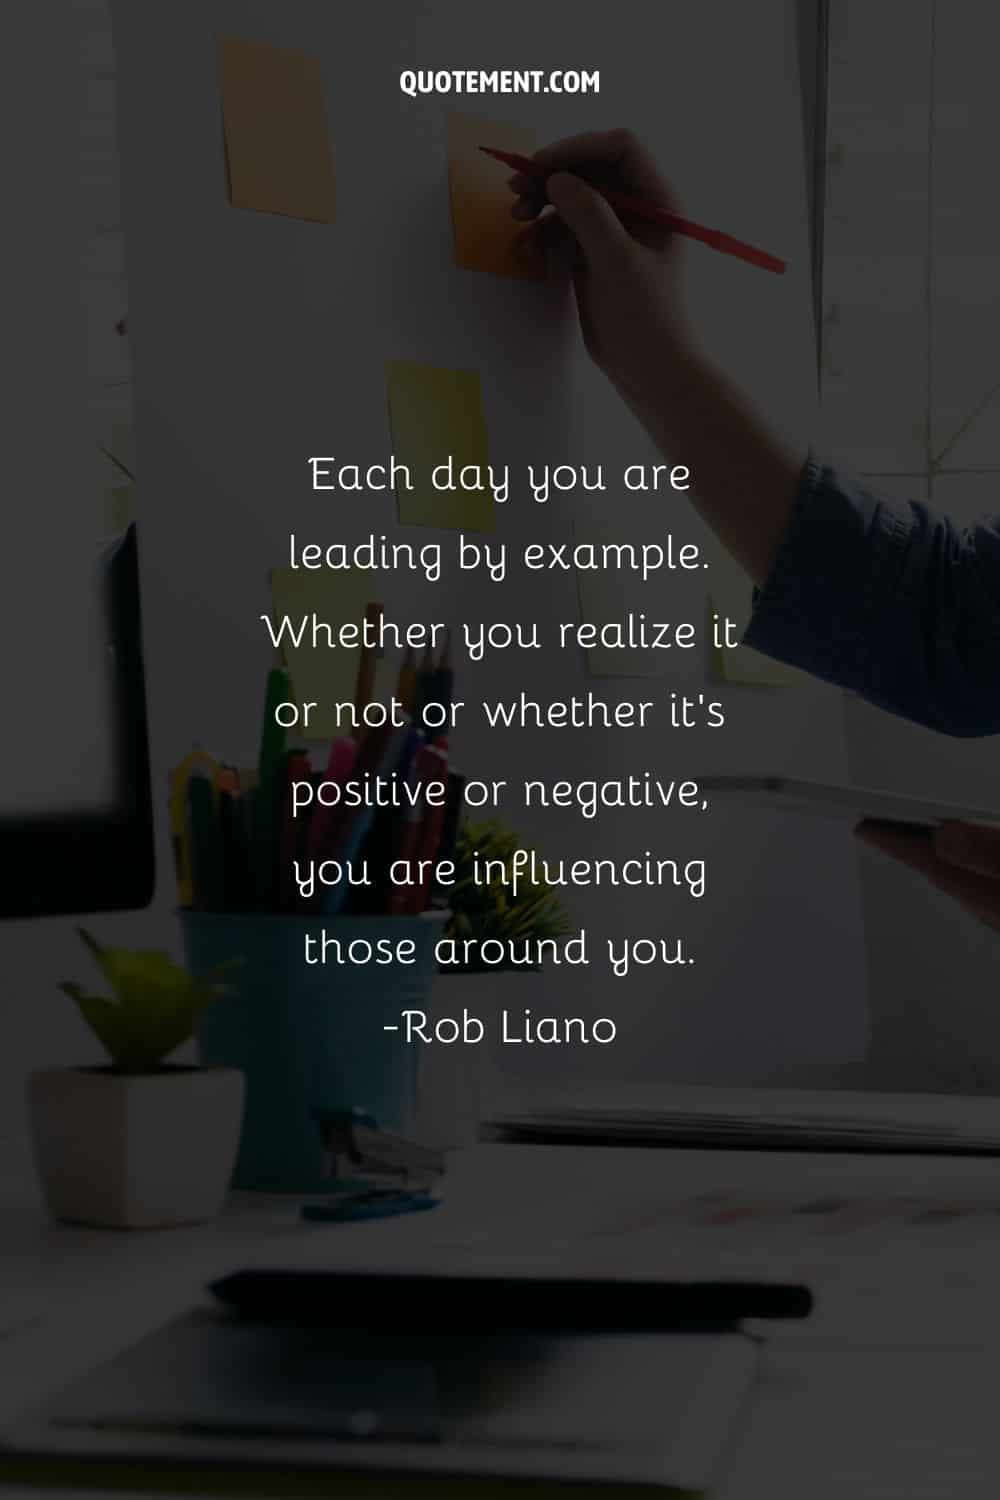 Each day you are leading by example